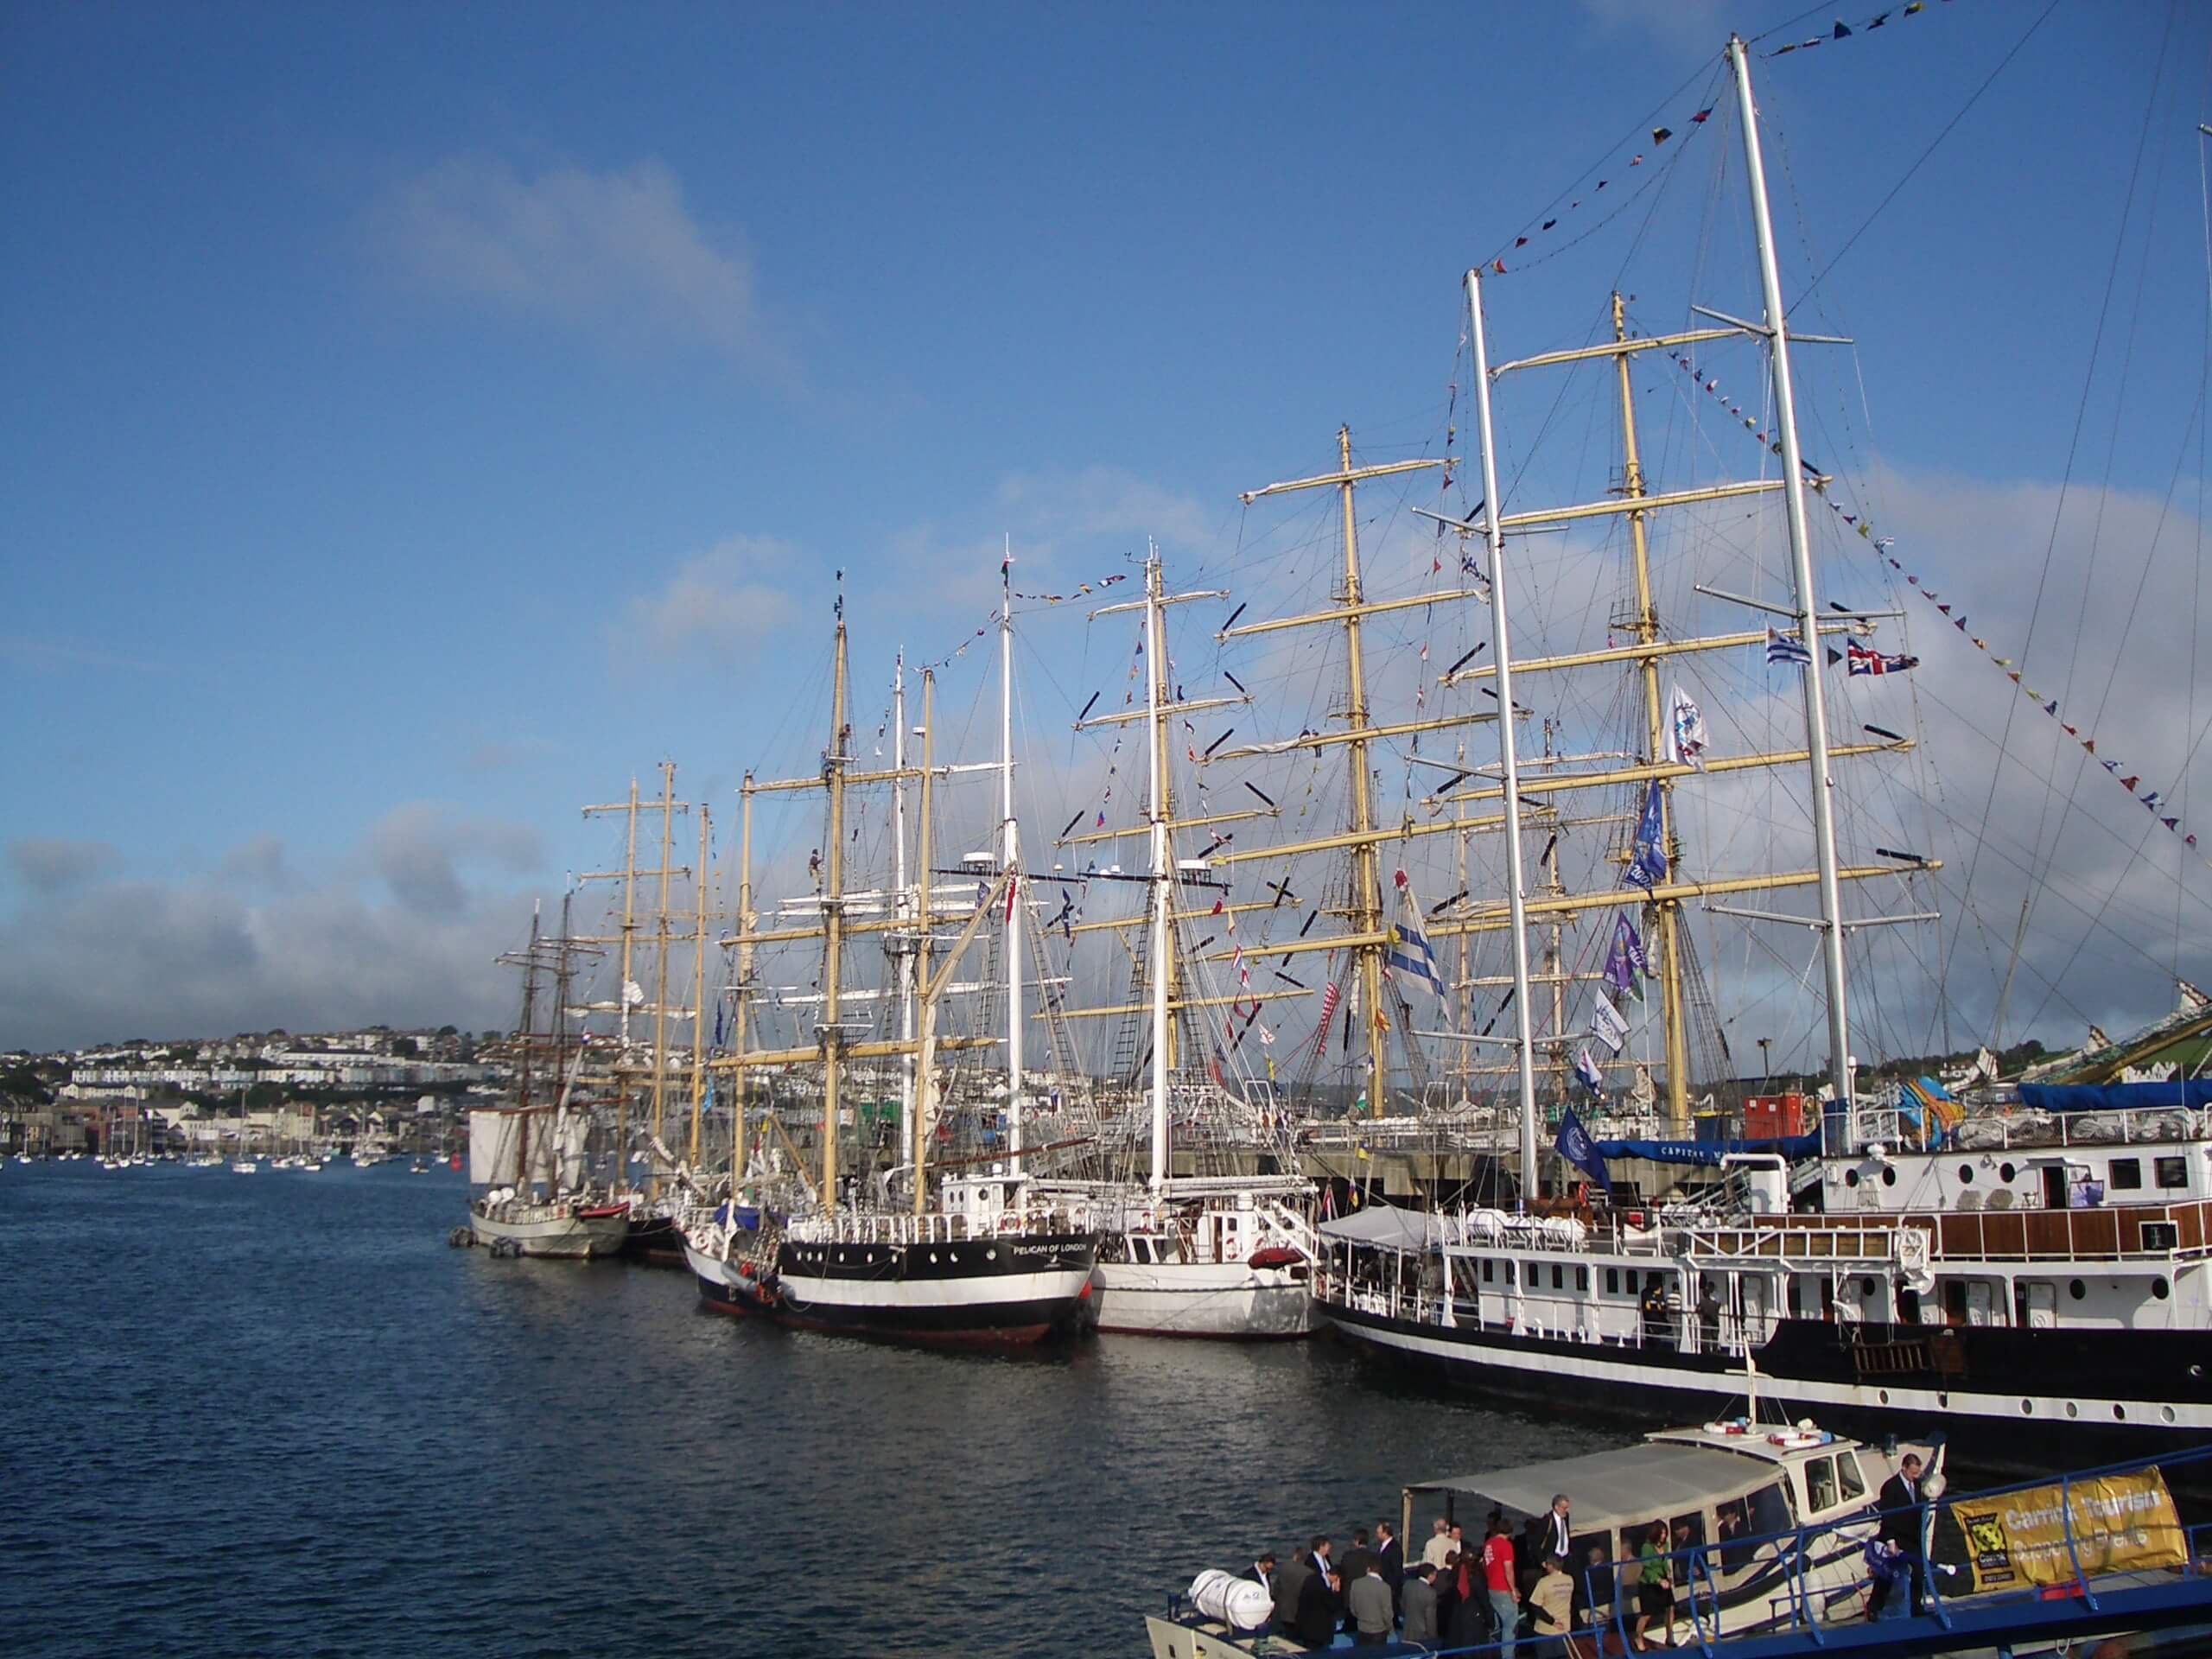 A photo of several tall ships stationed alongside County Wharf, at A&P Falmouth, in 2008. The photo is taken on a cloudy day with blue skies and calm harbour waters.